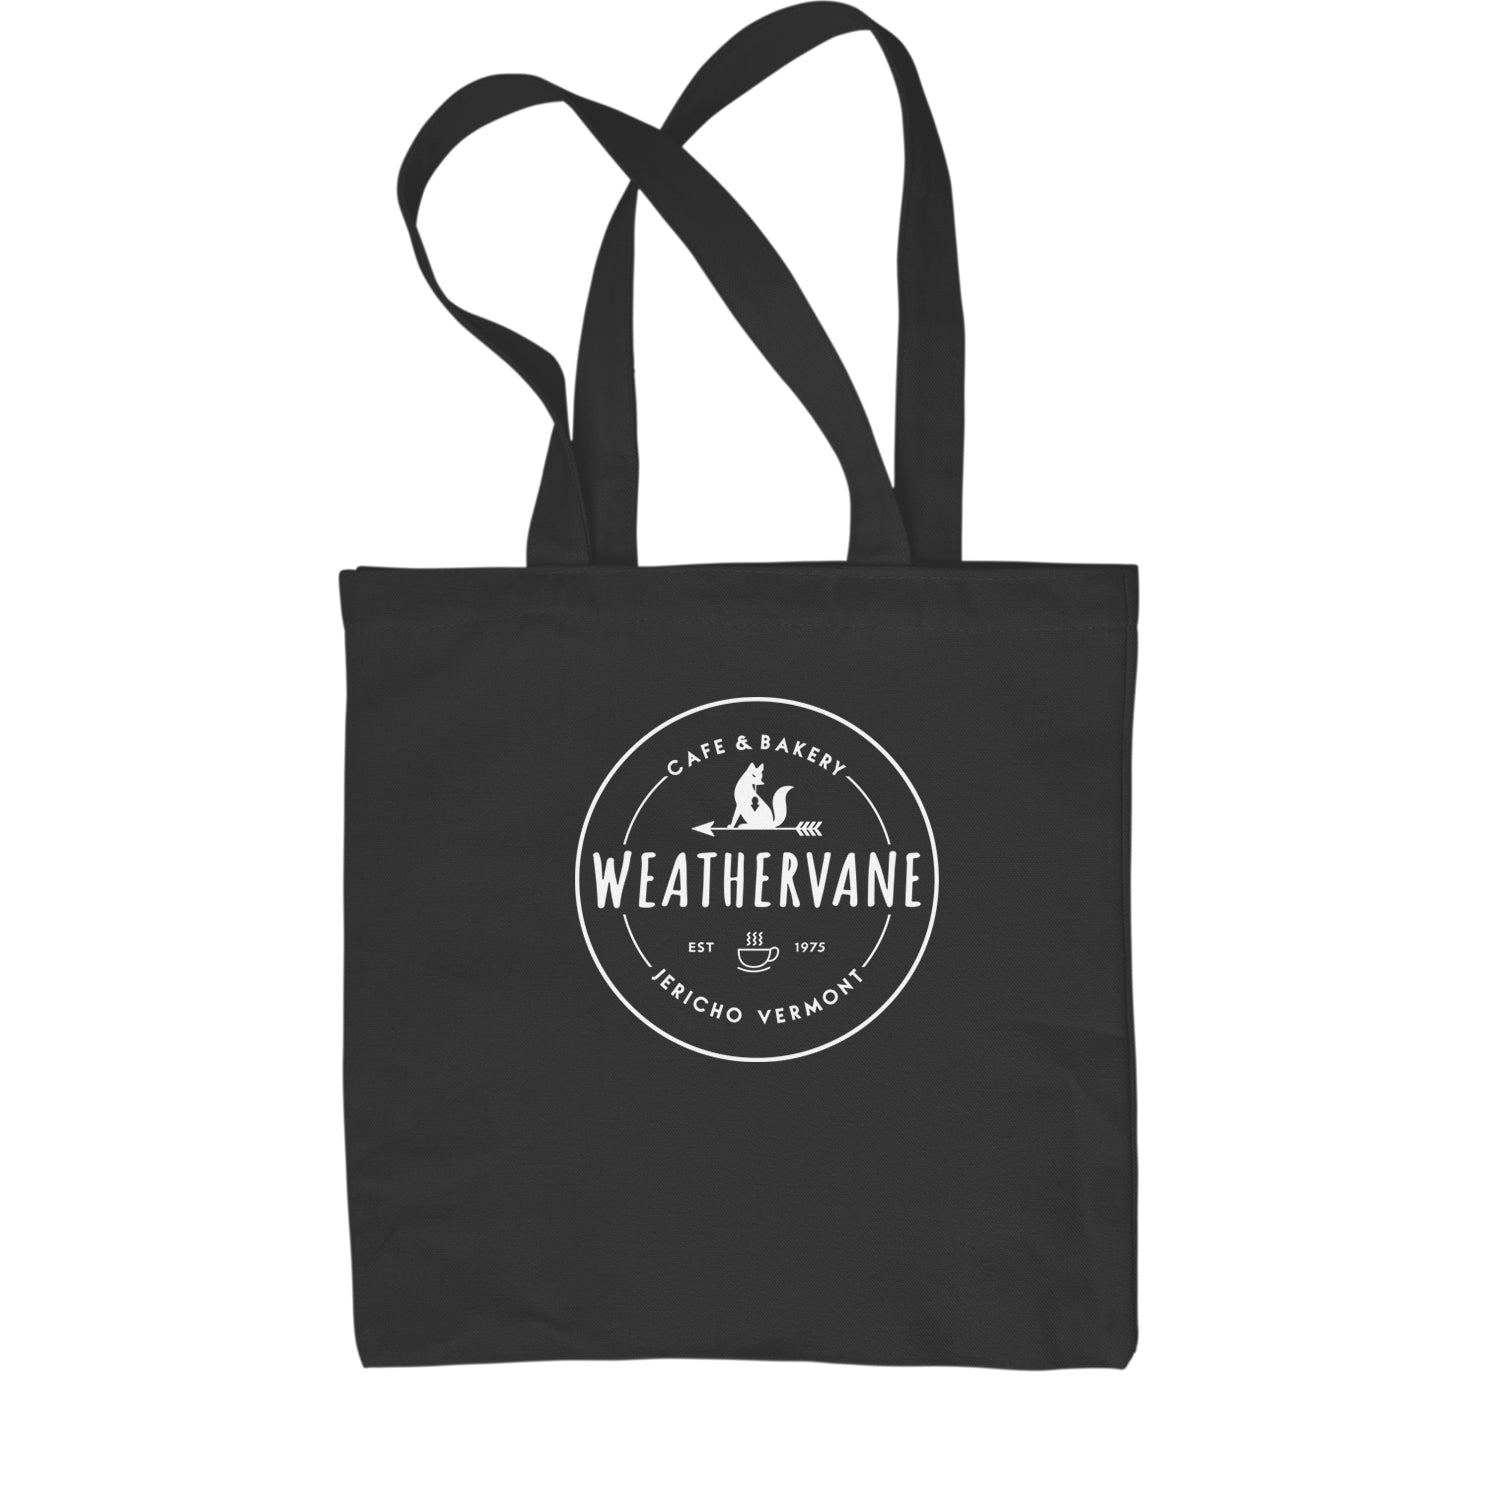 Weathervane Coffee Shop Shopping Tote Bag academy, jericho, more, never, vermont, Wednesday by Expression Tees